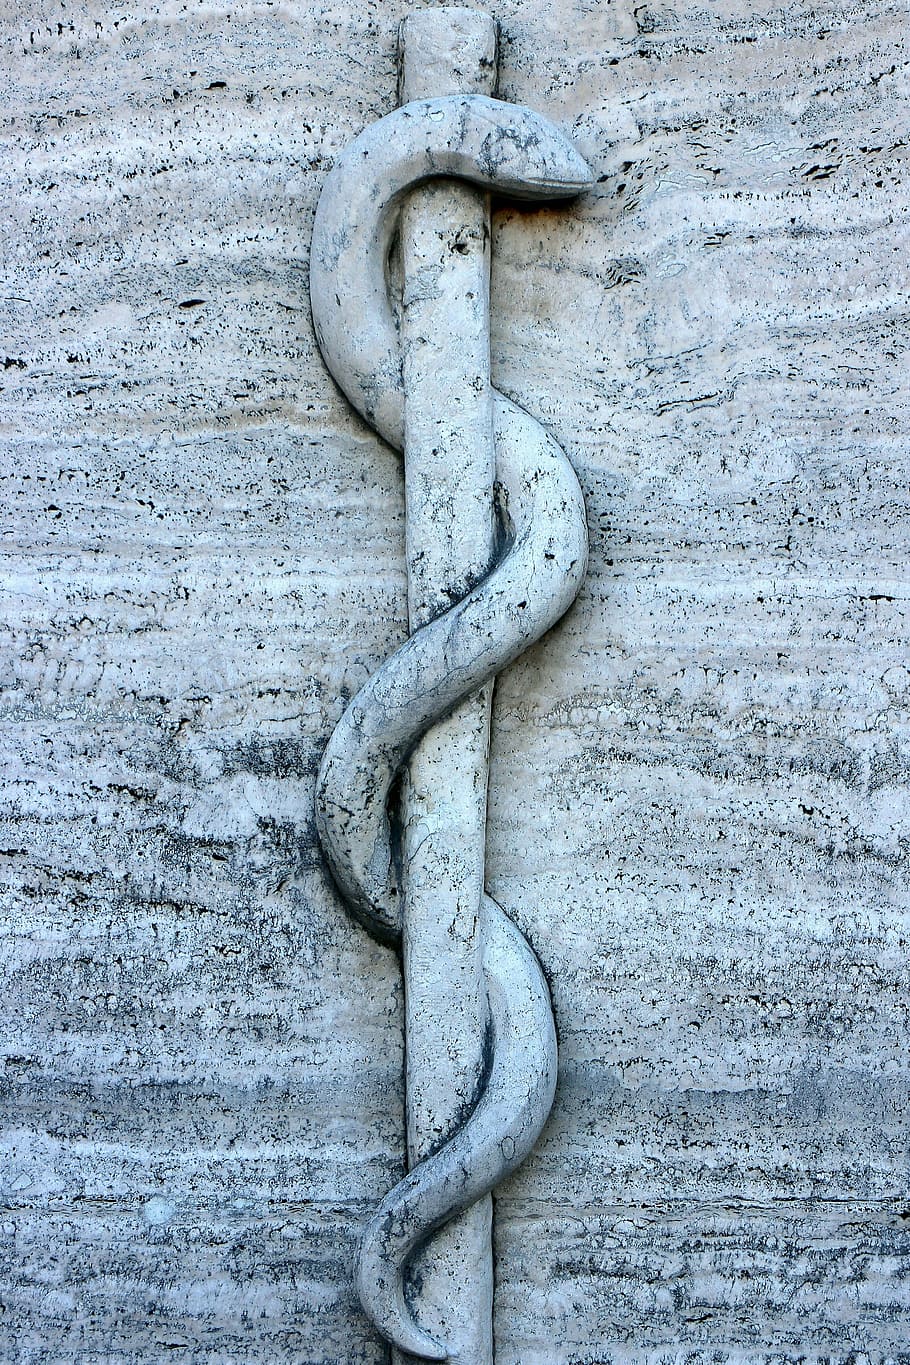 snake, carved, wall art, relief, symbol, rod, äskulapstab, asclepius staff, medical, doctor